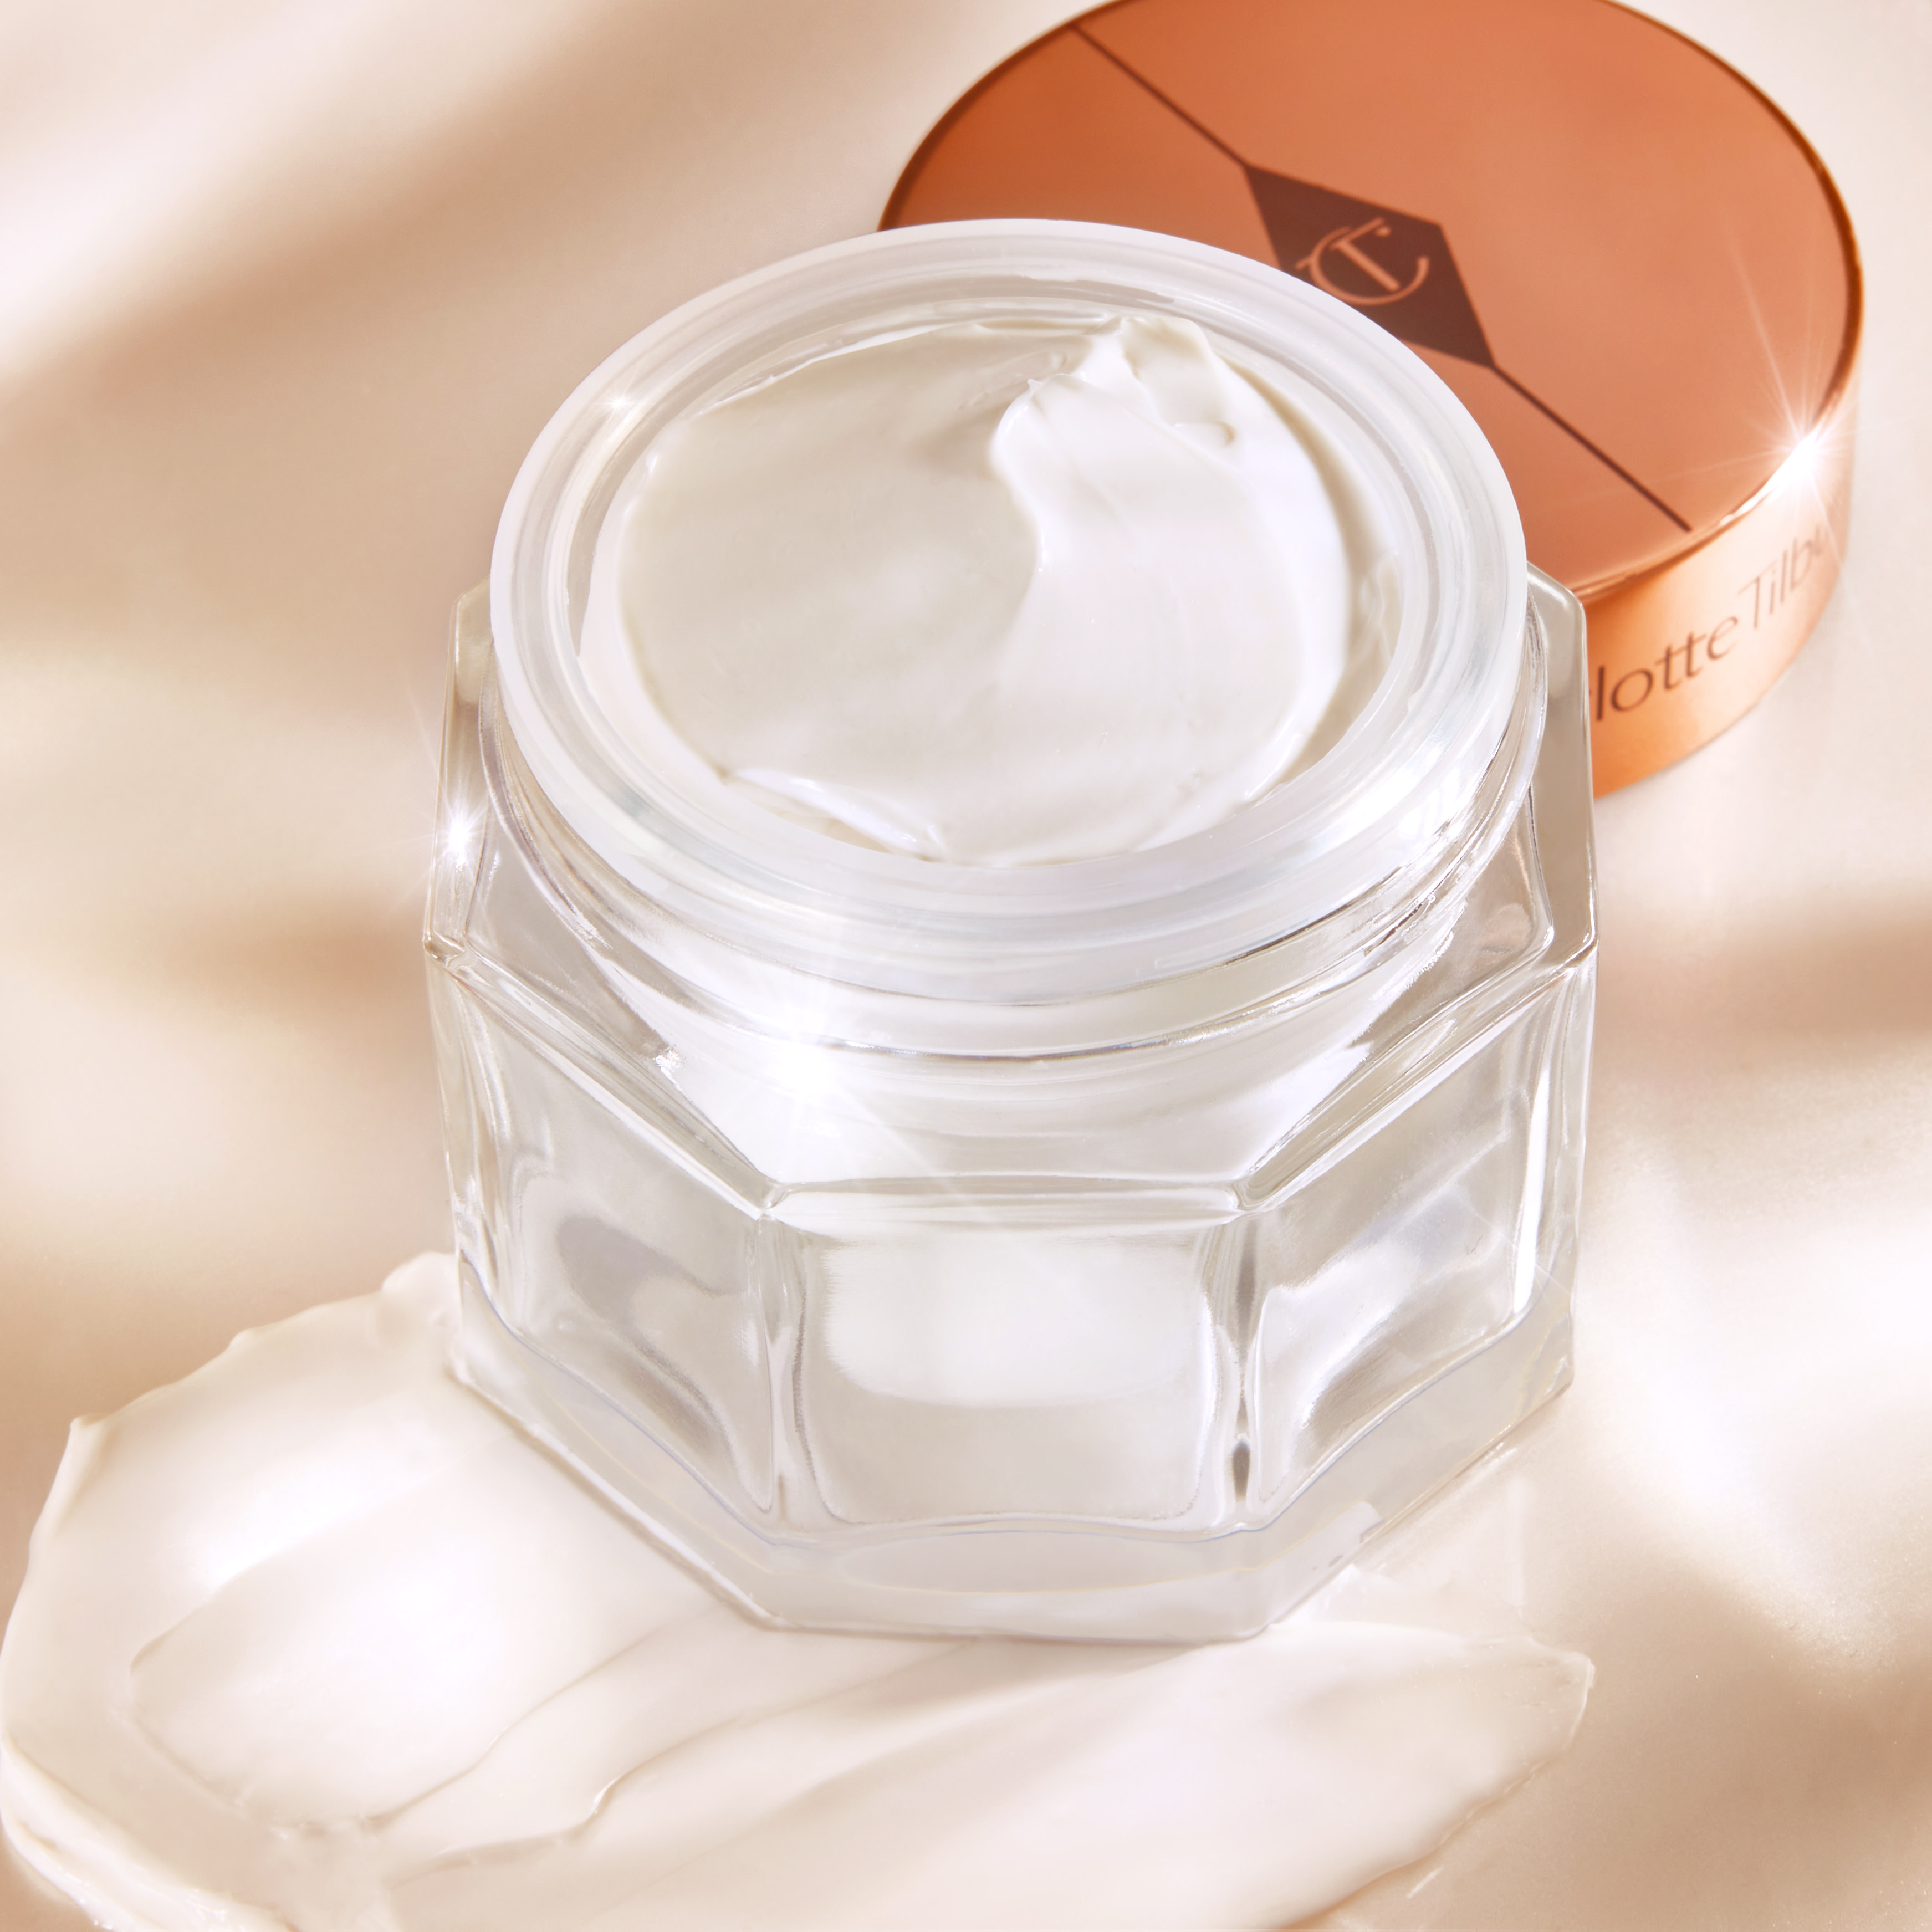 Thick and luscious pearly-white moisturiser in an open glass jar with its gold-coloured lid placed behind it. swatch for winter skincare routine blog